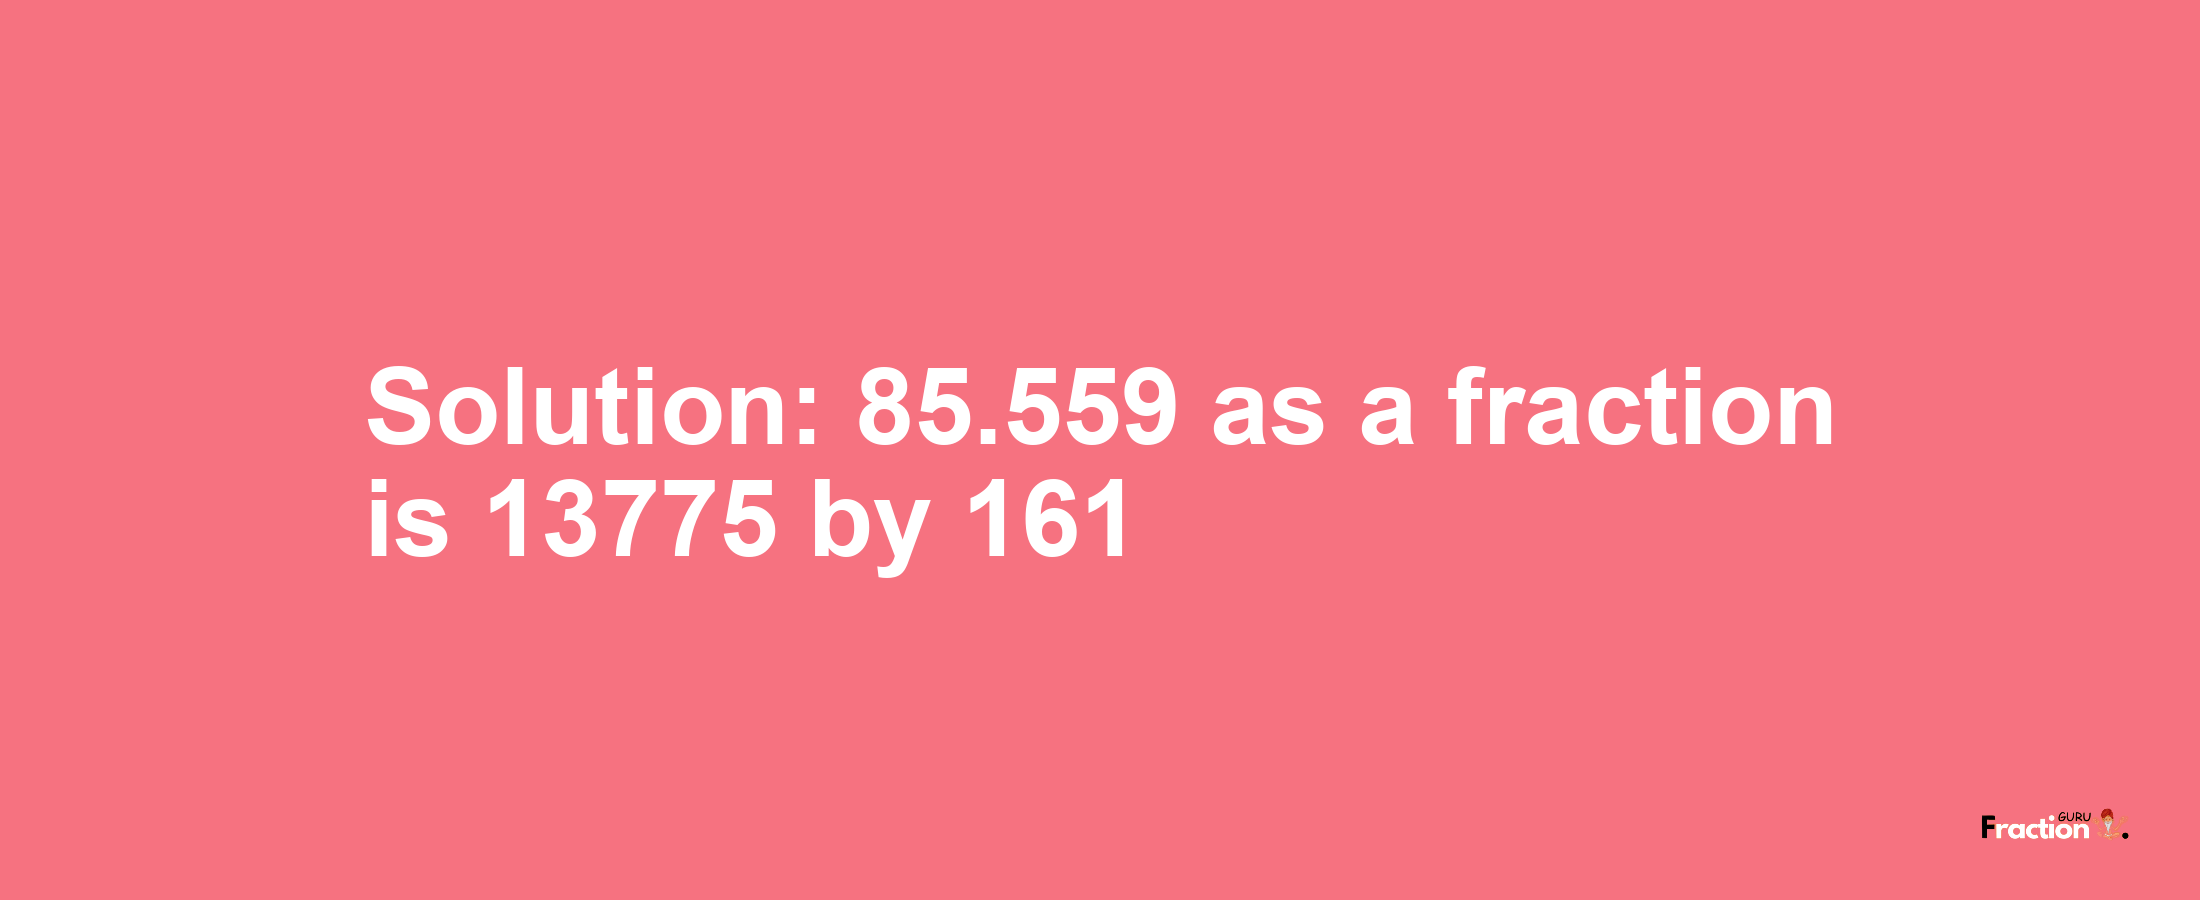 Solution:85.559 as a fraction is 13775/161